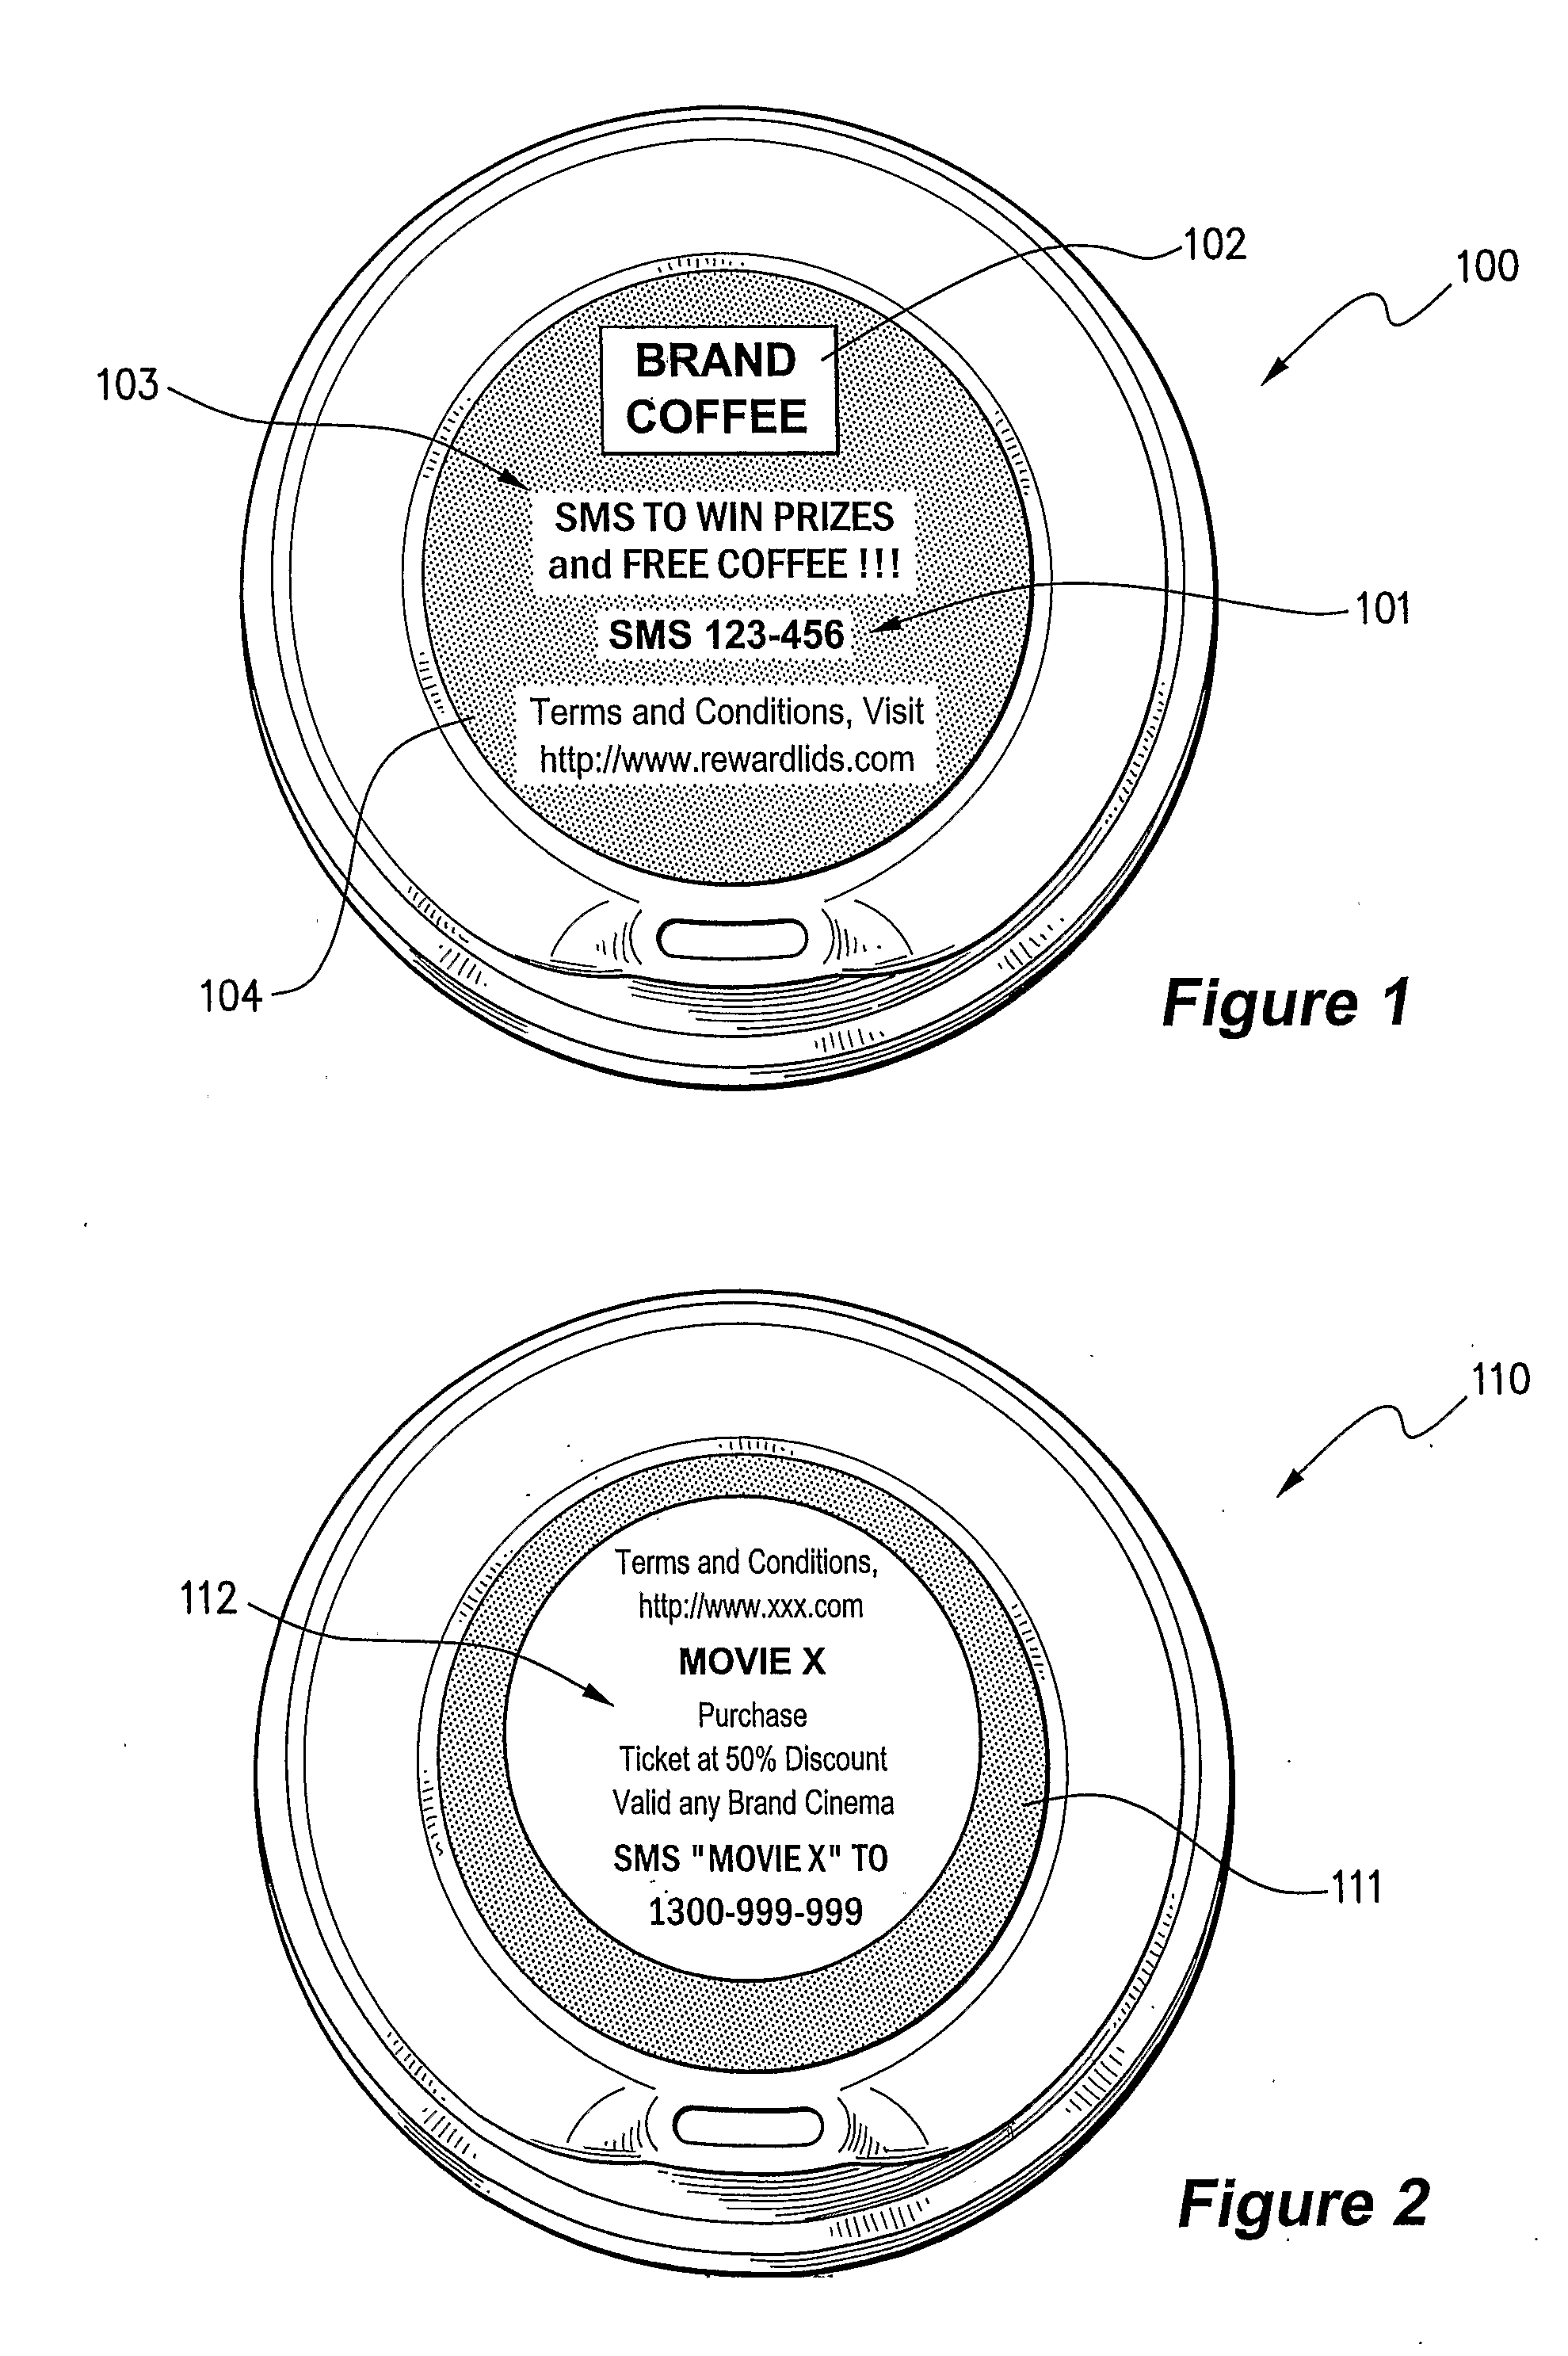 Device, Method and System for Facilitating a Transaction